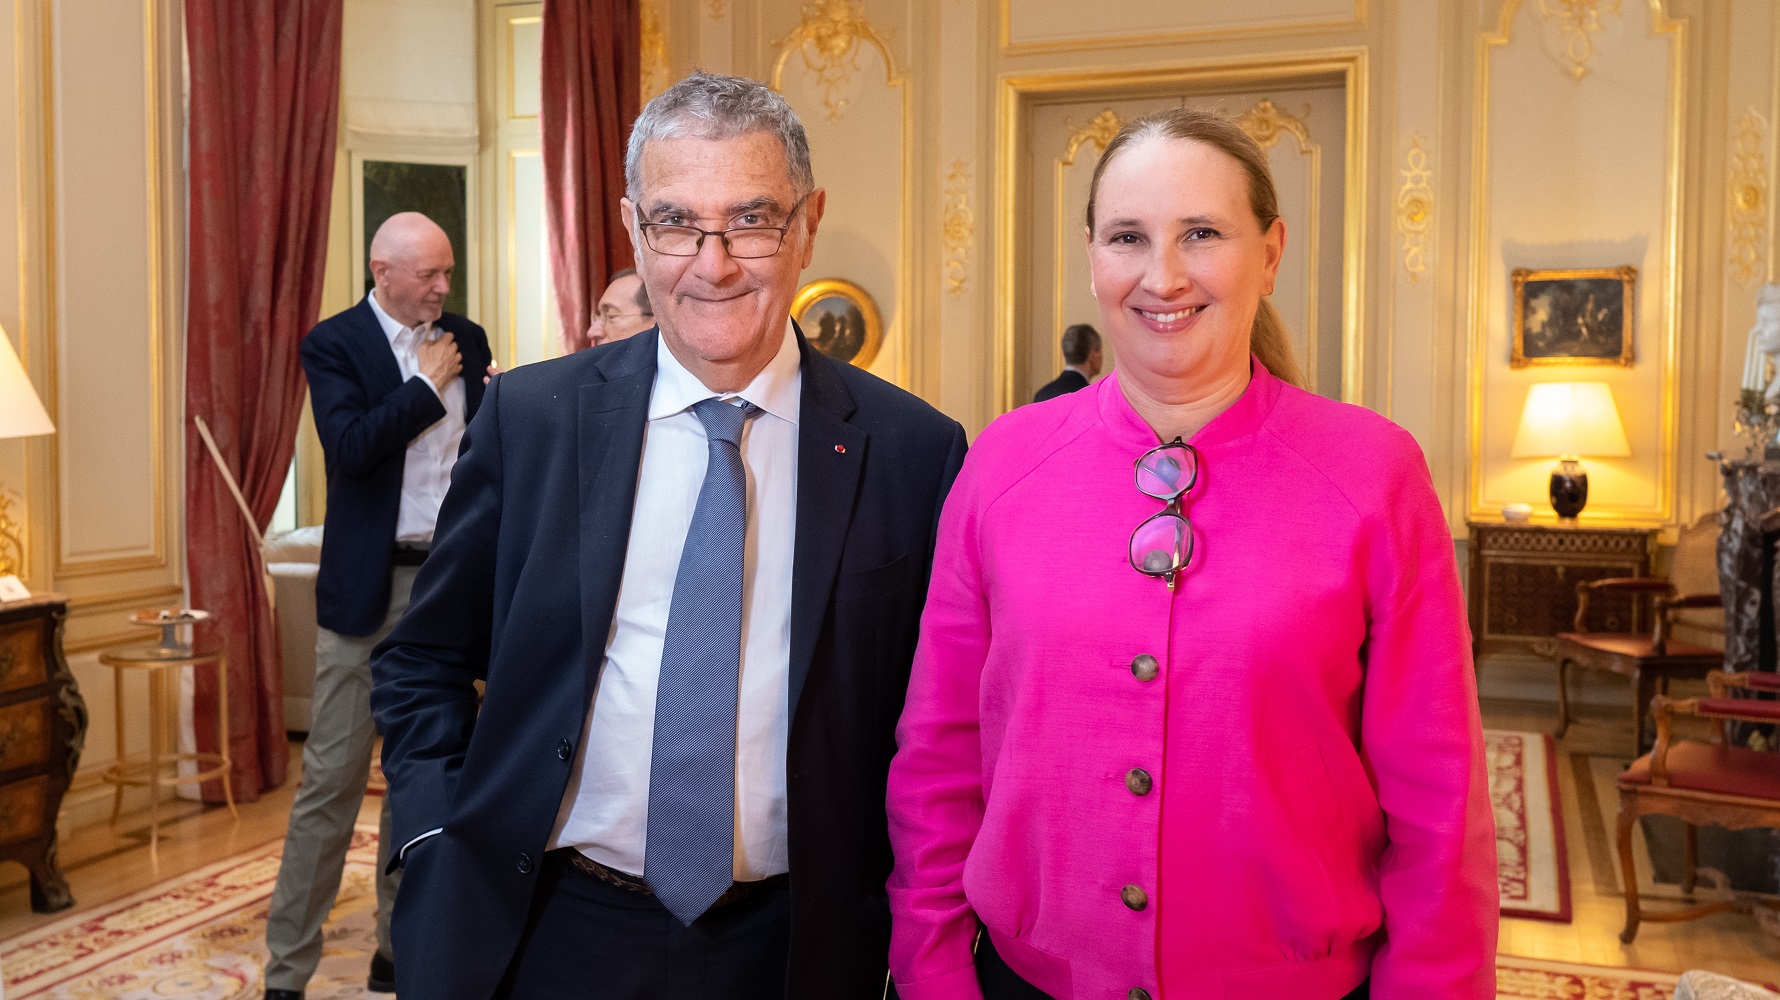 Visual aid: Nobel Prize Serge Haroche posing with a woman at an event at the French Embassy in London